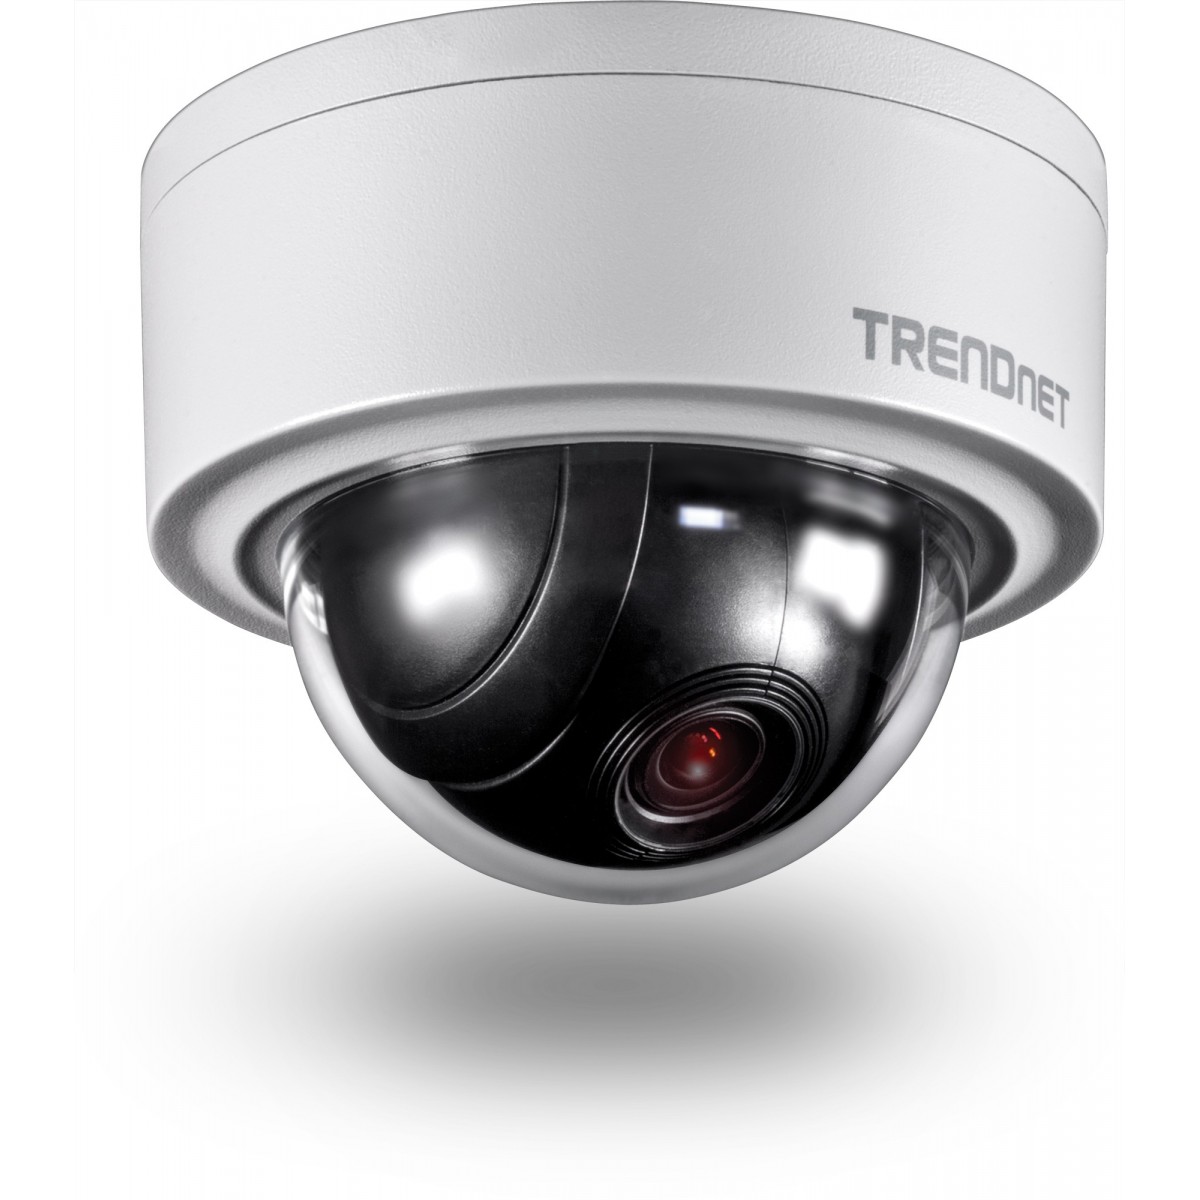 TRENDnet TV-IP420P - IP security camera - Outdoor - Wired - CE - FCC - Dome - Ceiling